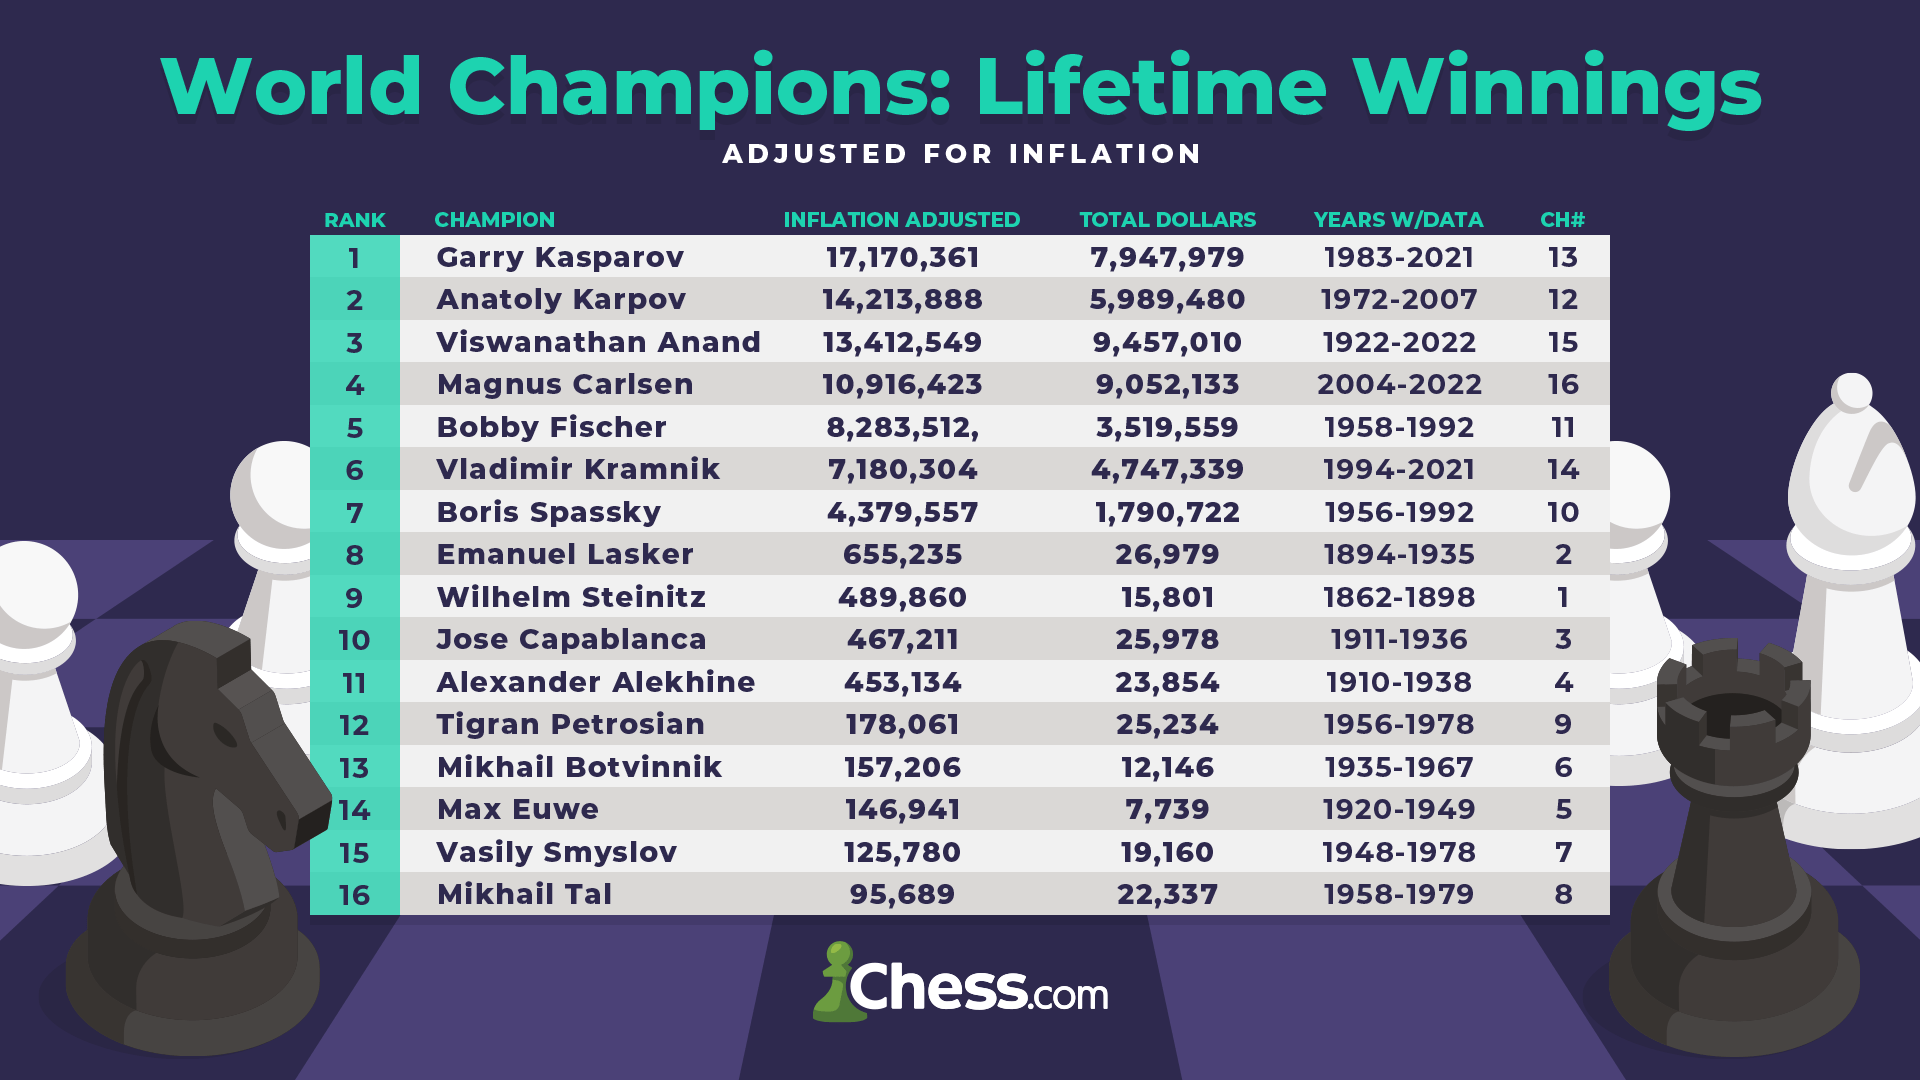 Who Is The Biggest Prizewinner In Chess History? 